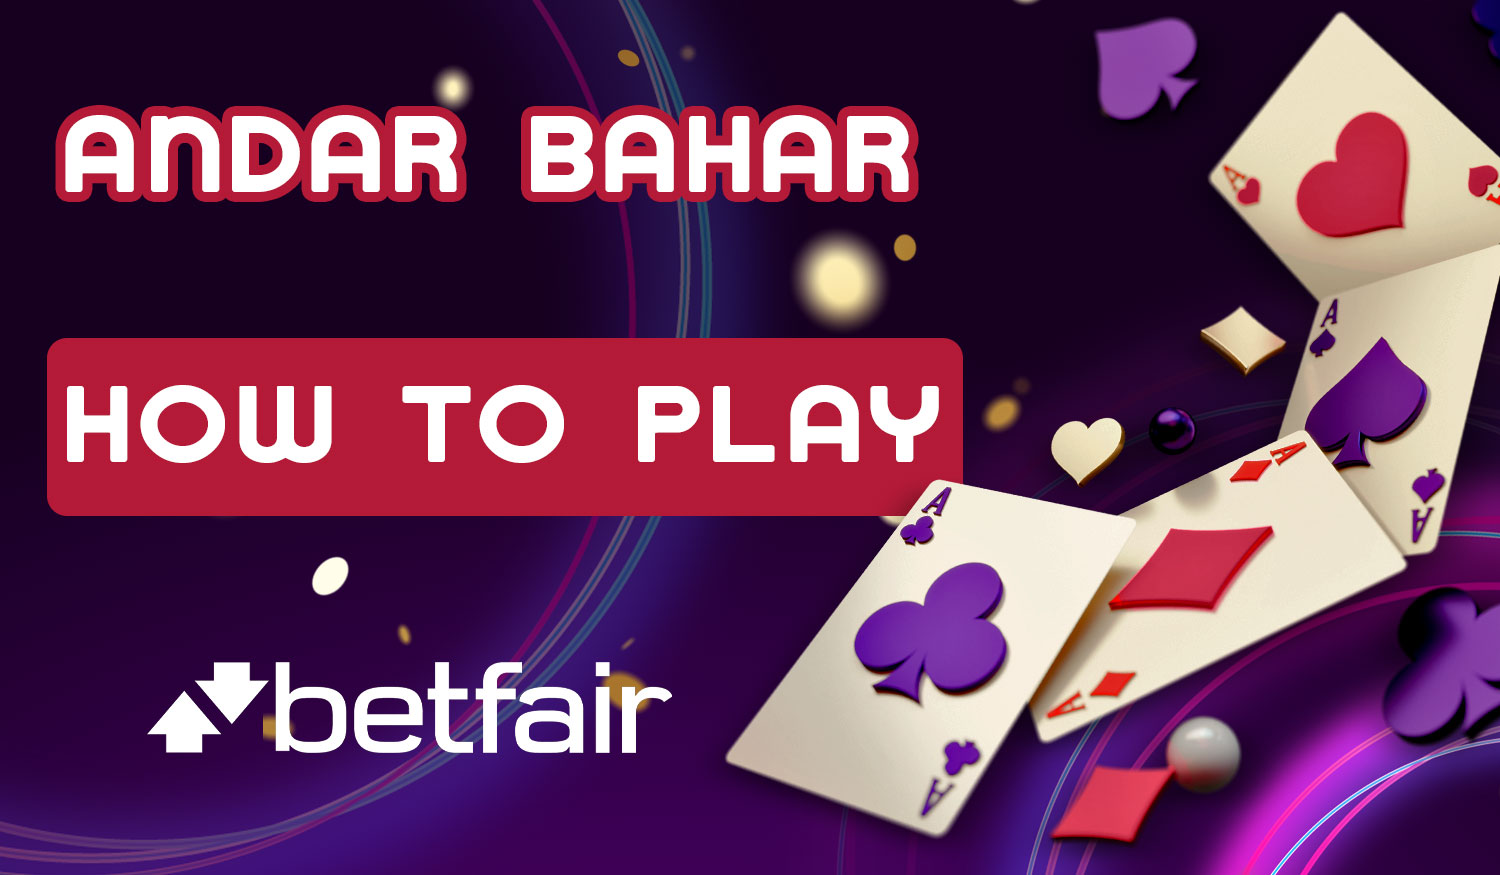 Detailed guide on how to play Andar Bahar on the Betfair platform in India